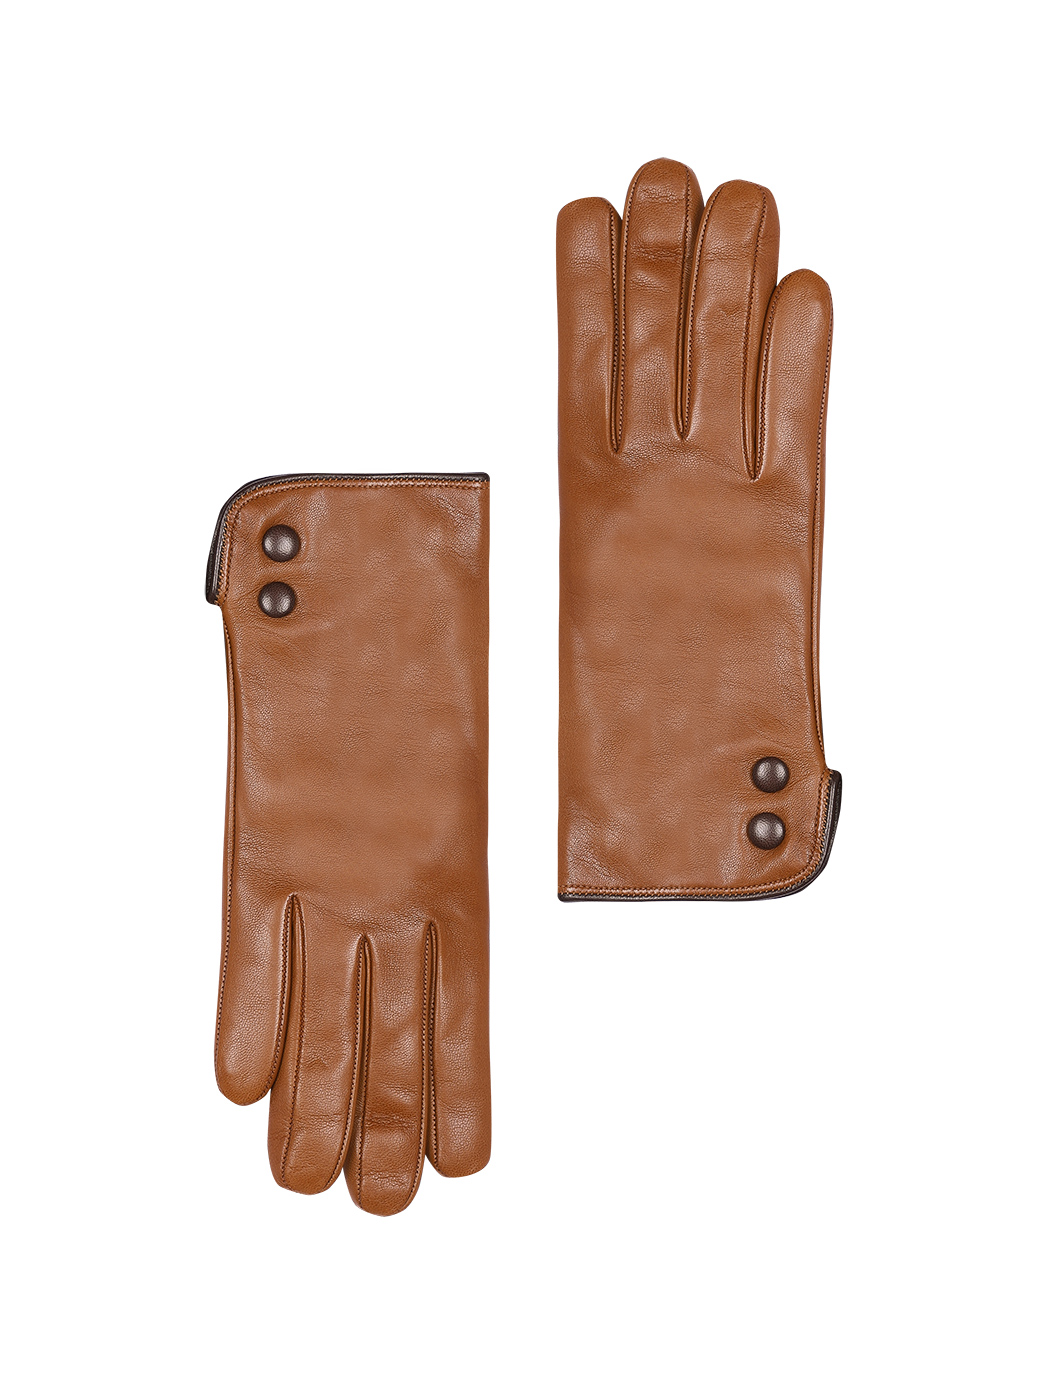 Women's Lambskin Gloves Cashmere Lined Buttons Brown